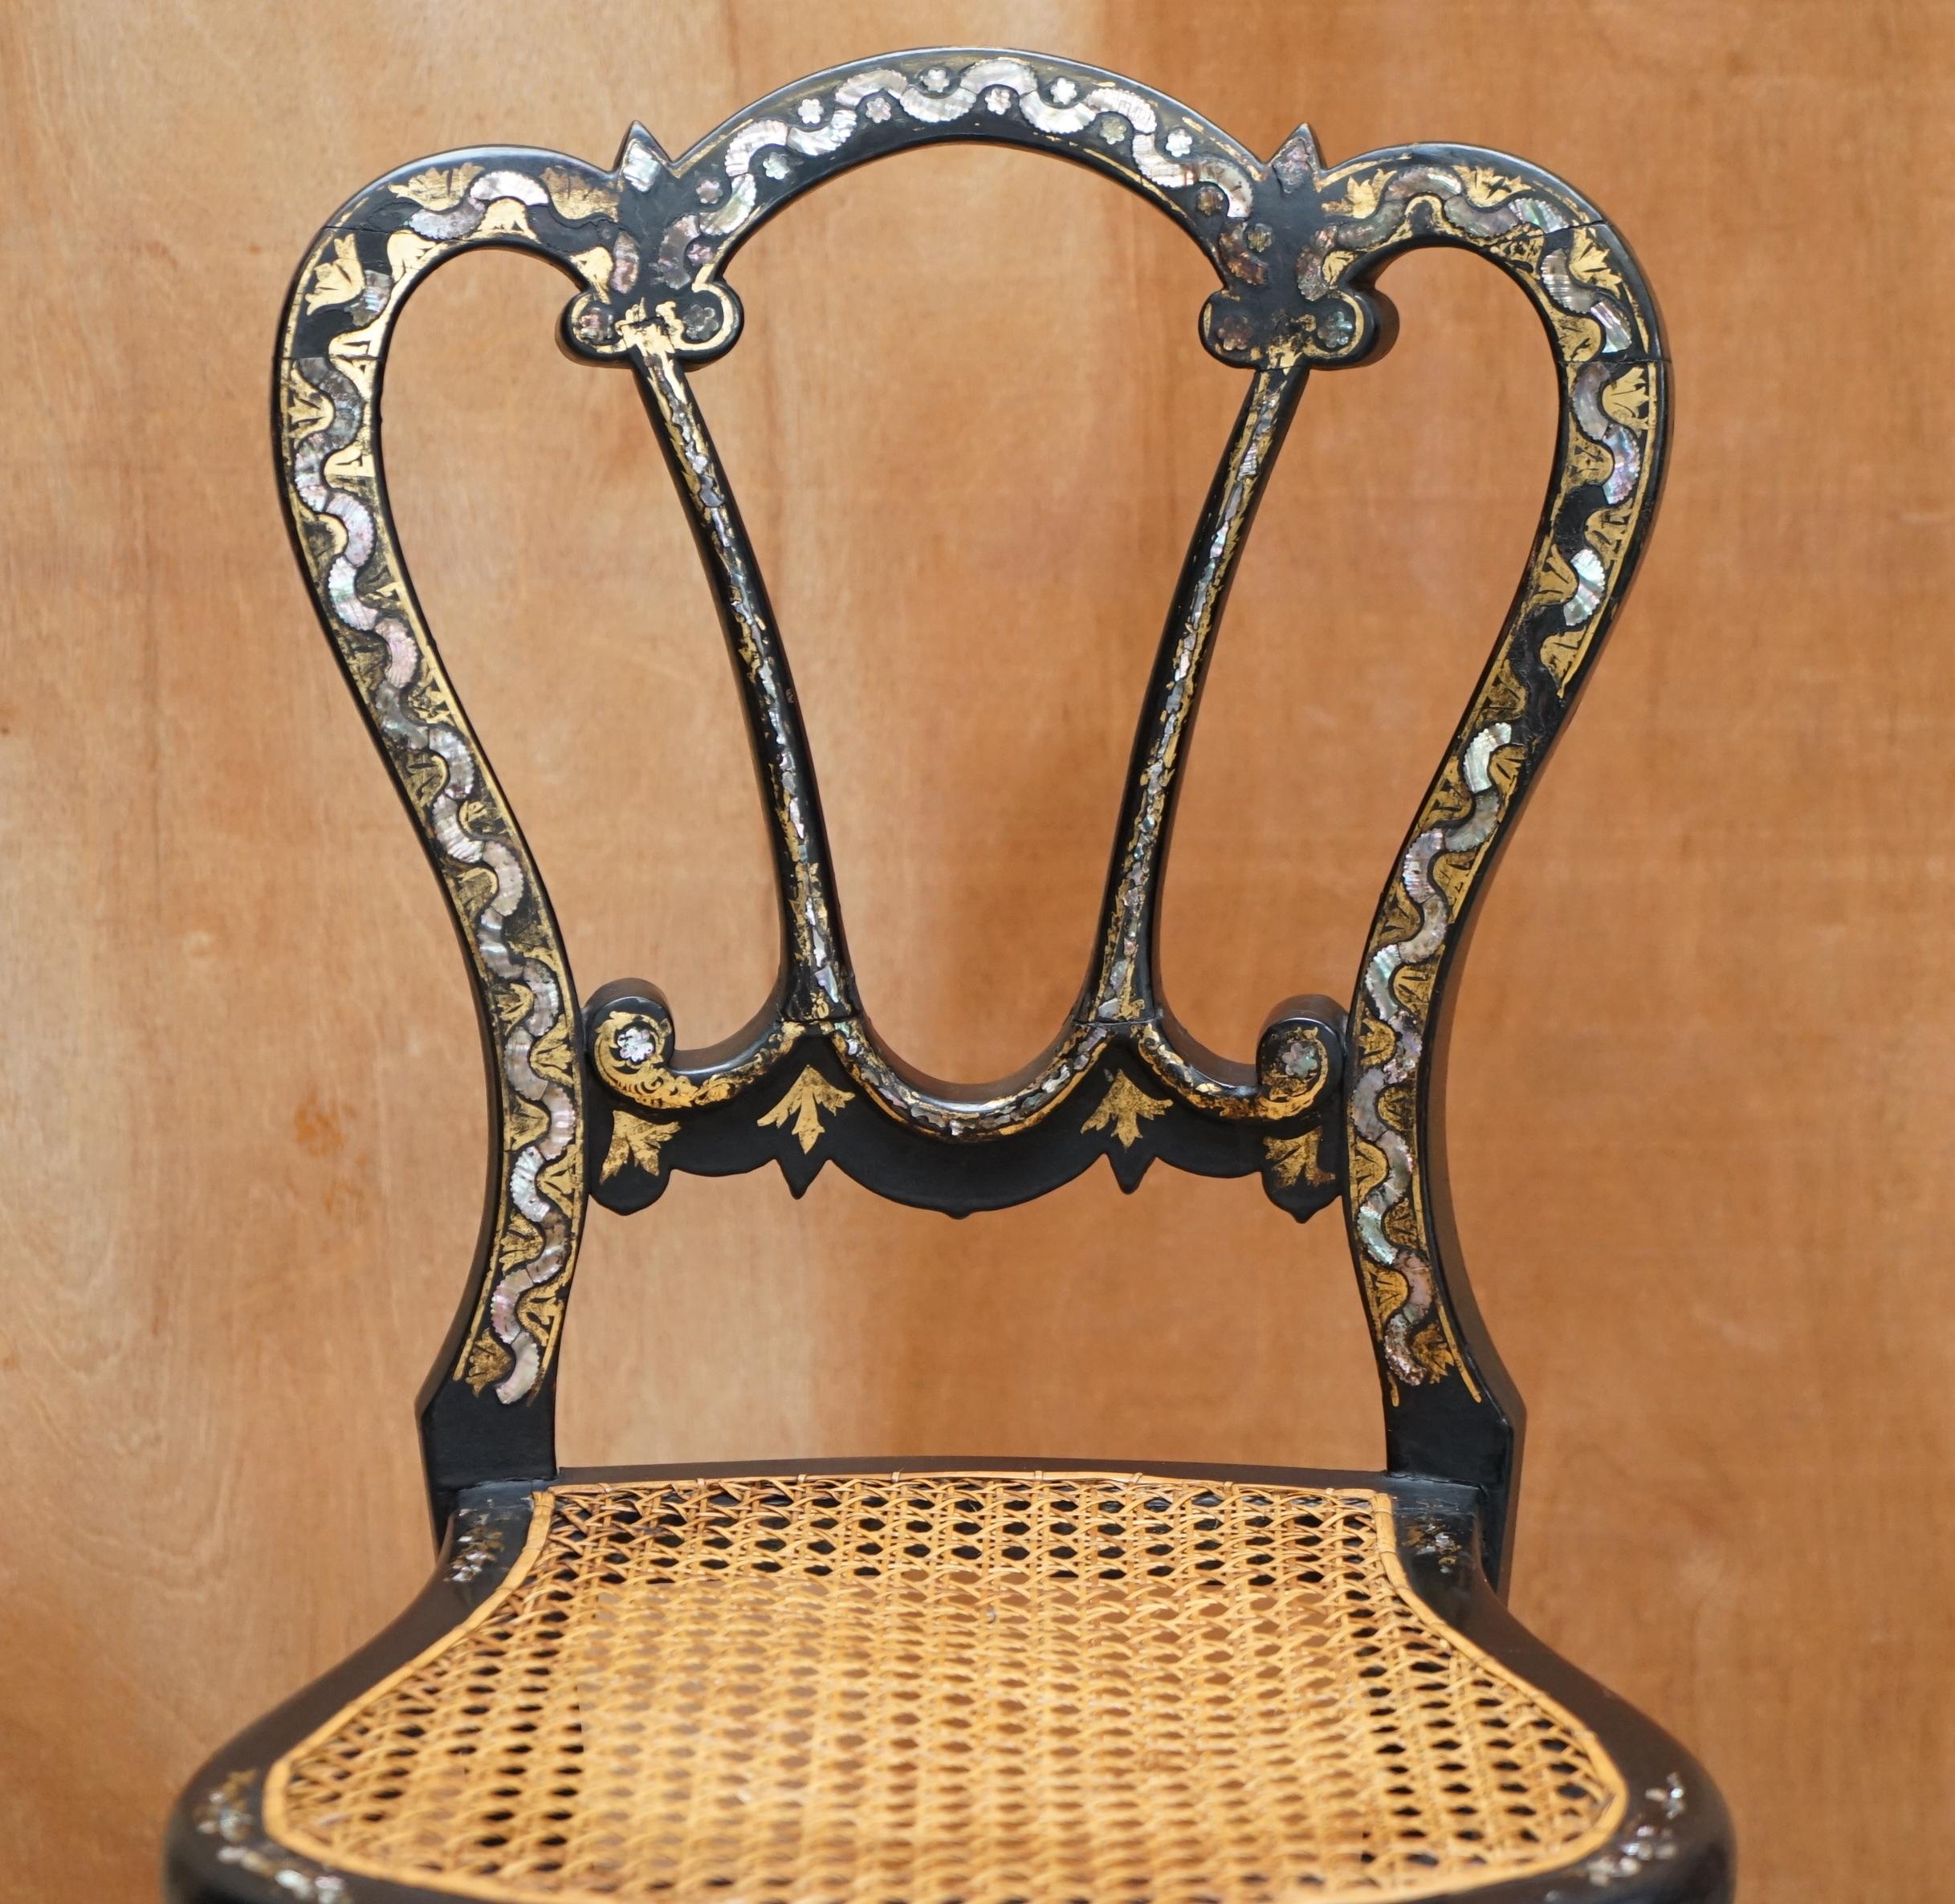 We are delighted to offer for sale this exquisite original circa 1815 Regency ebonised gold leaf painted and heavily mother of pearl inlaid occasional bergere chair

A very good looking well made and decorative chairs, this is one of the most